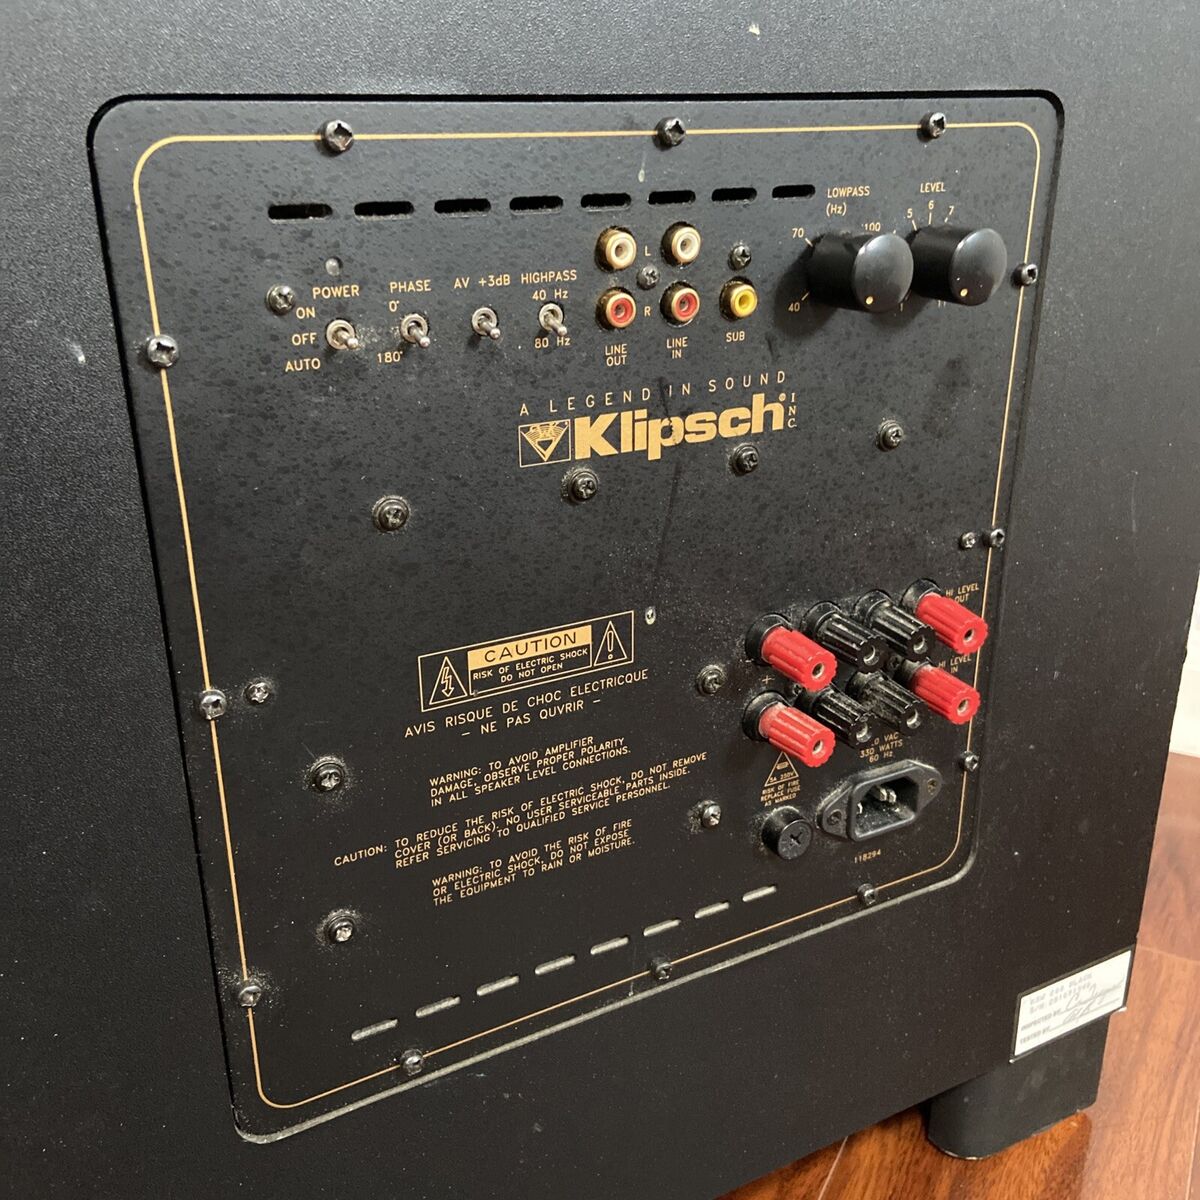 How To Connect Klipsch Subwoofer To Yamaha Receiver